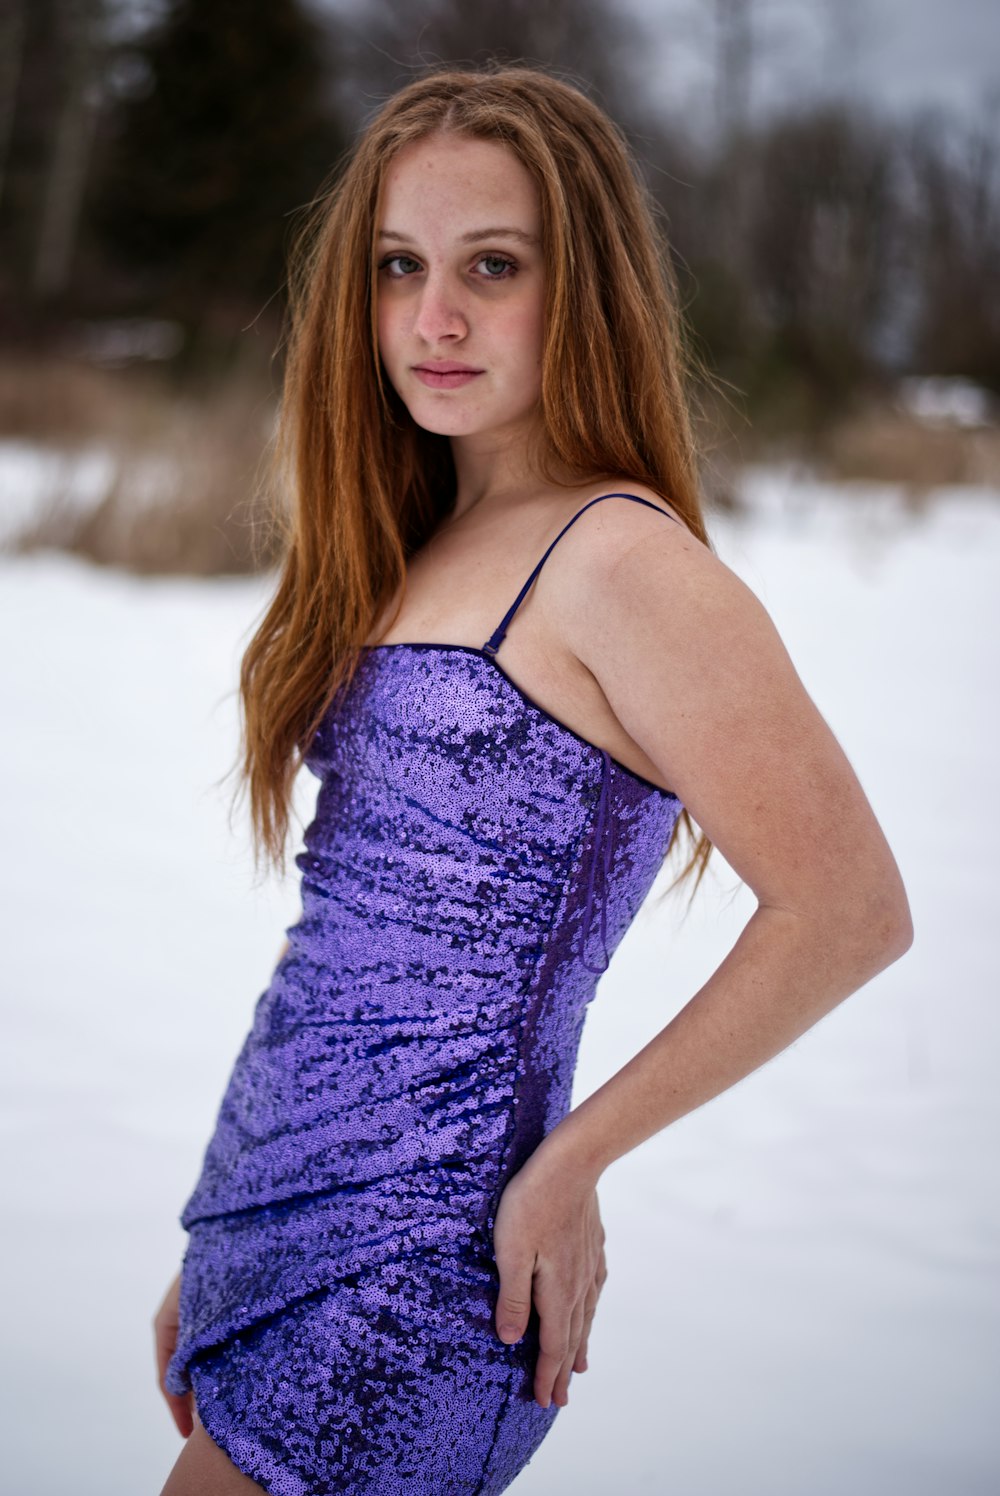 a woman in a purple dress posing in the snow